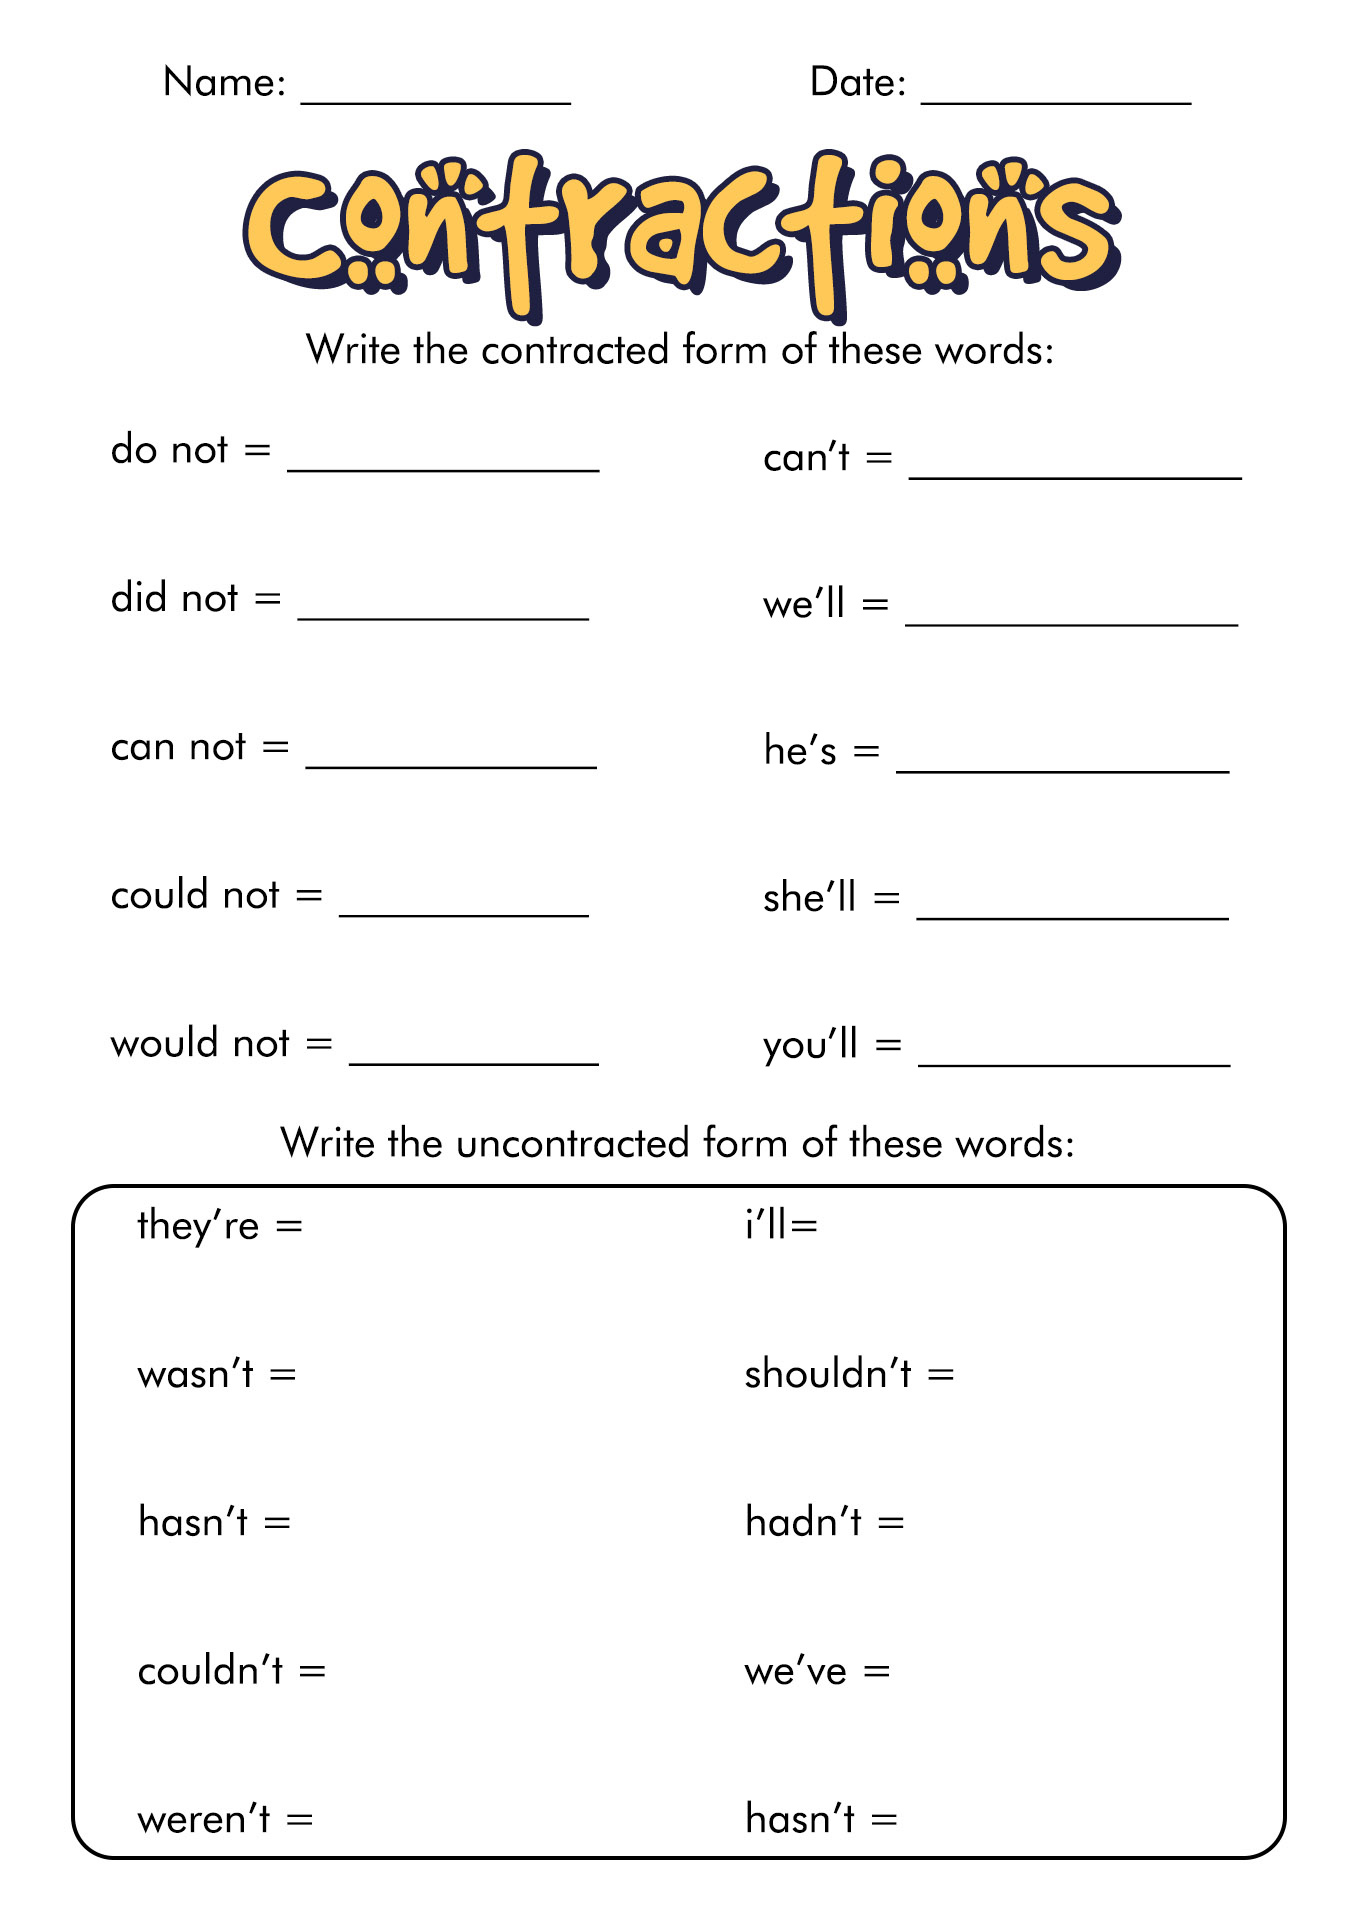 15-best-images-of-pronoun-contractions-worksheets-contraction-worksheets-grade-1-personal